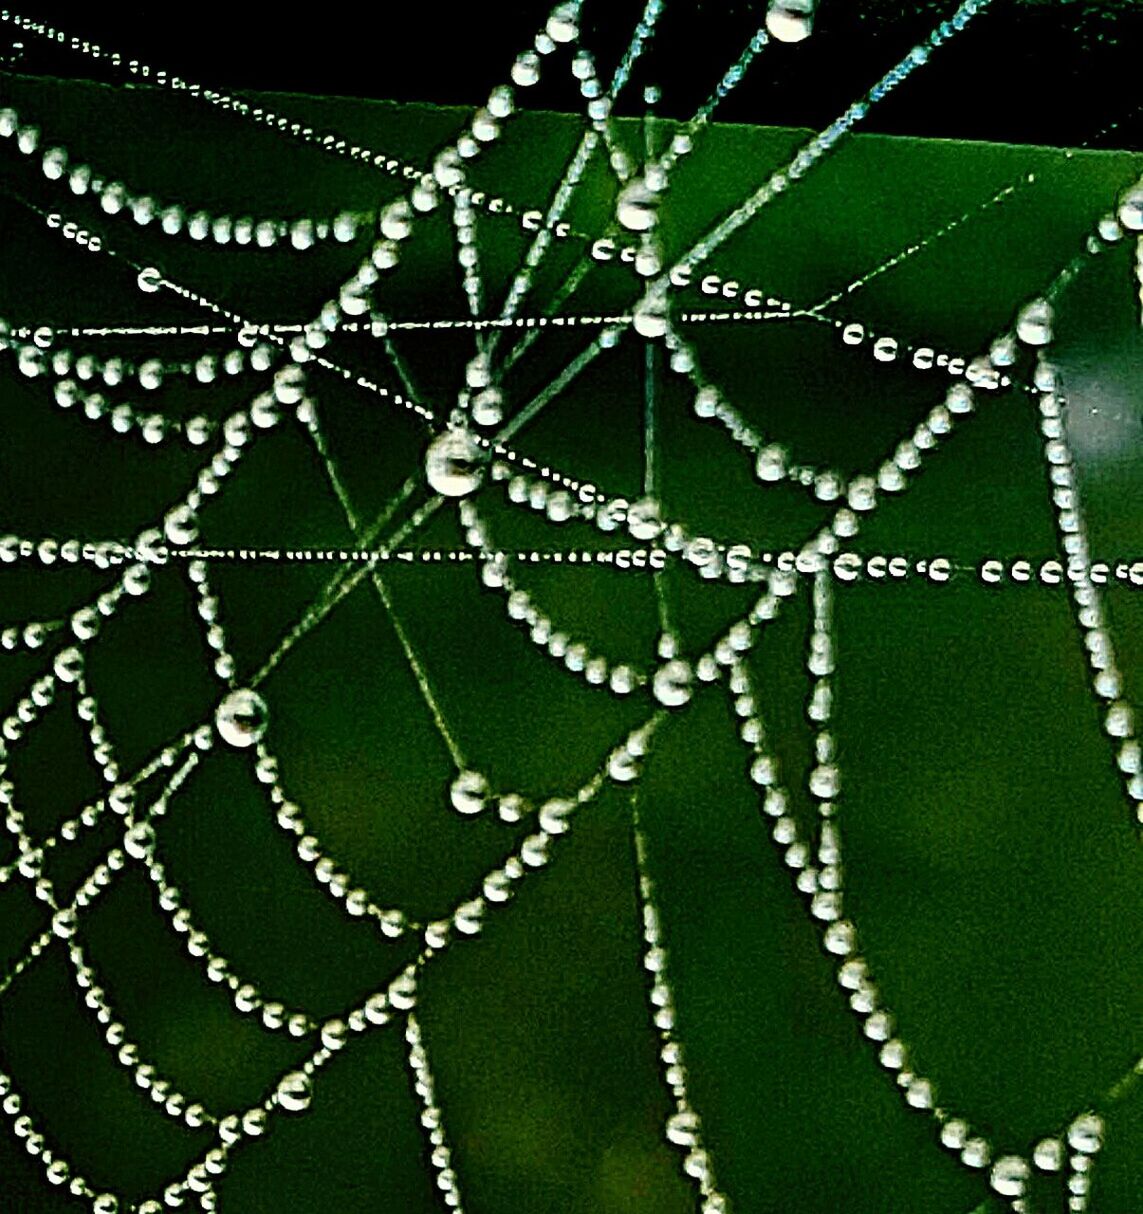 CLOSE-UP OF DEW DROPS ON SPIDER WEB